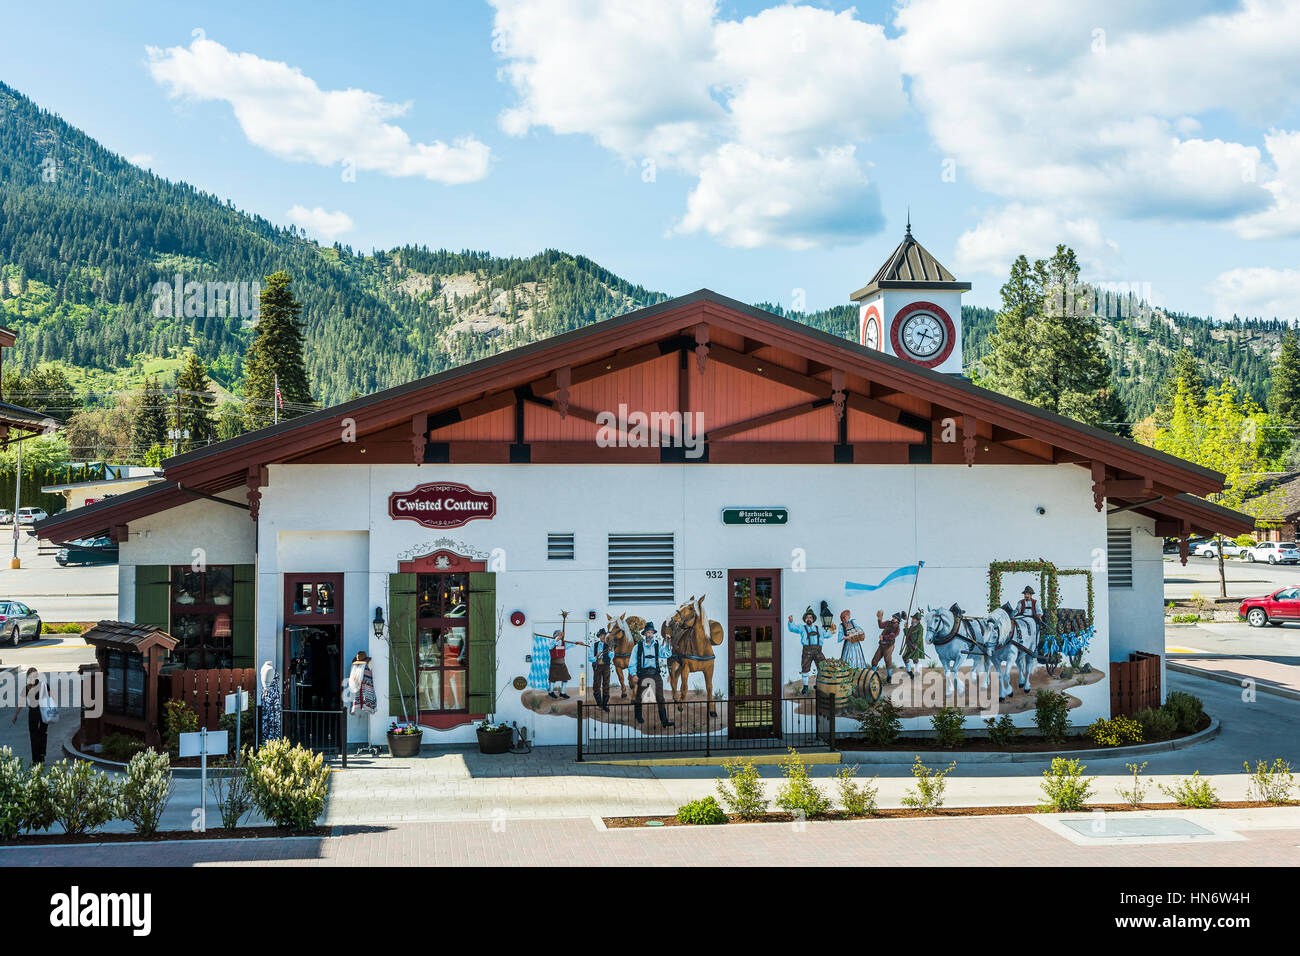 Leavenworth, USA - April 30, 2016: Bavarian Village shop in Washington state called Twisted Couture and Starbucks Stock Photo